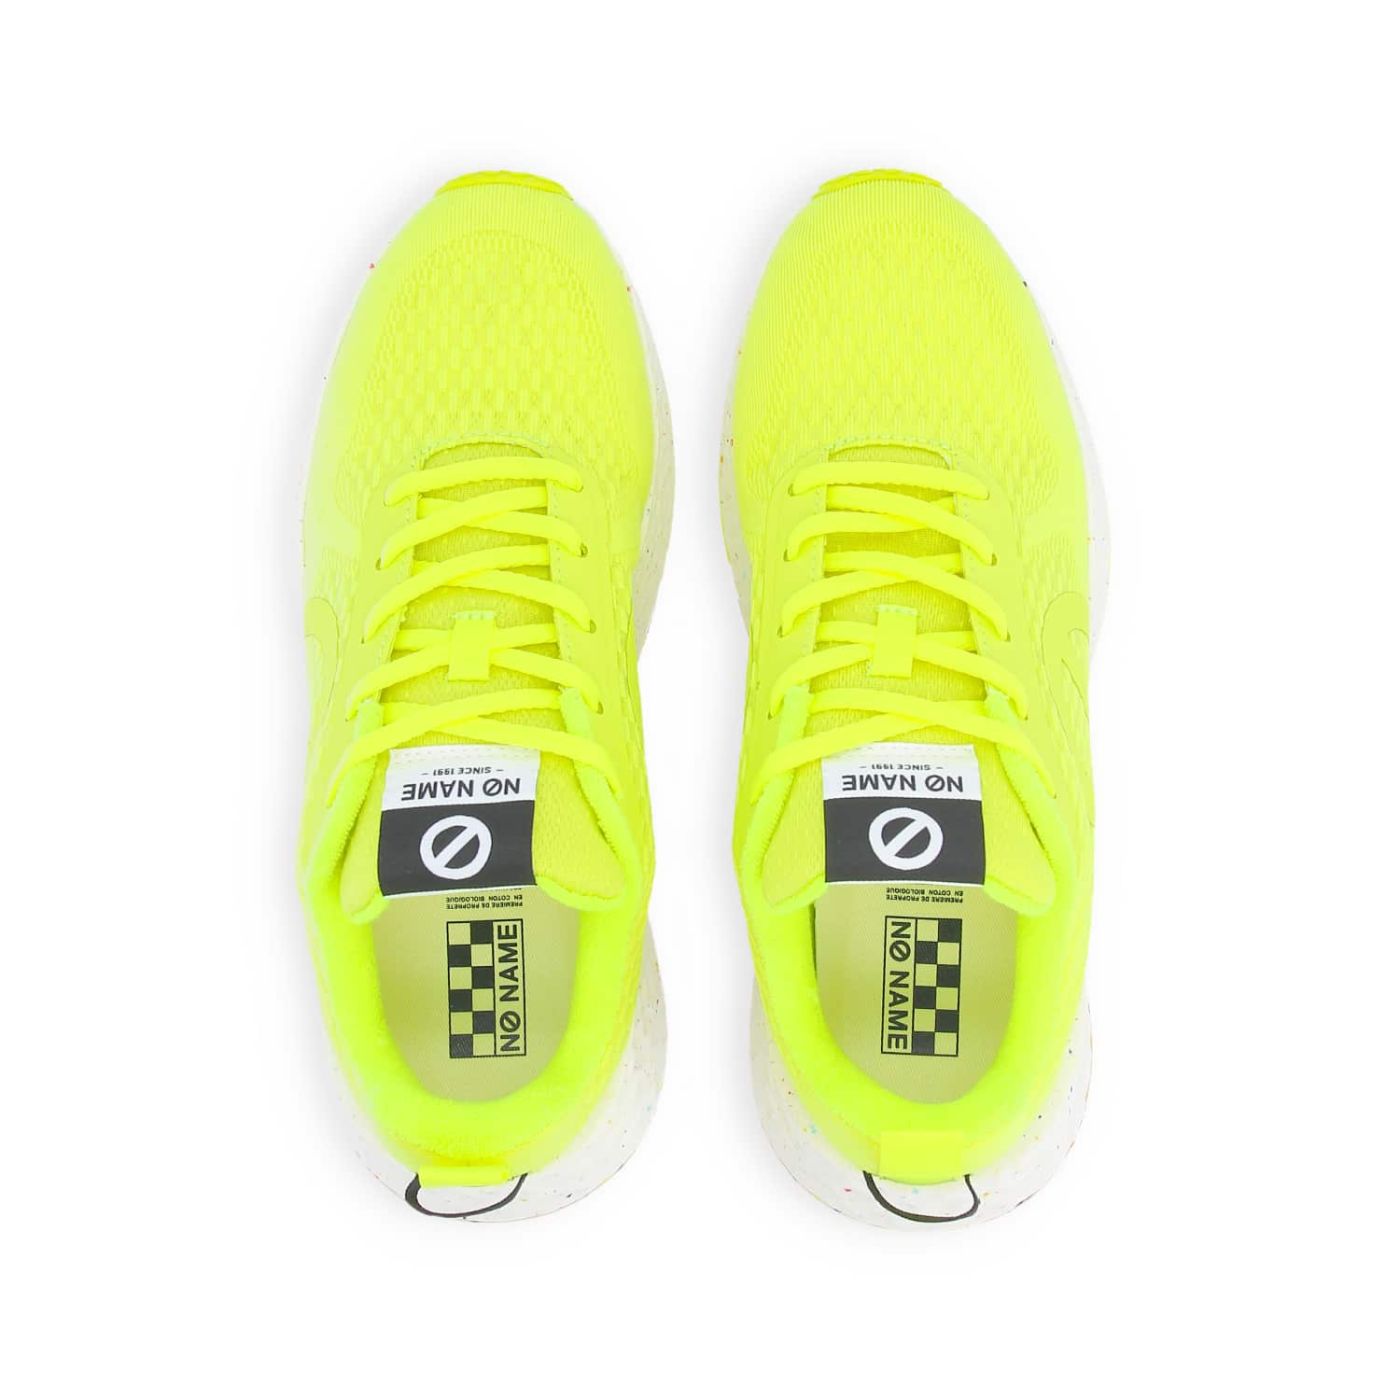 CARTER FLY MEN - MESH RECYCLED - FLUO YELLOW